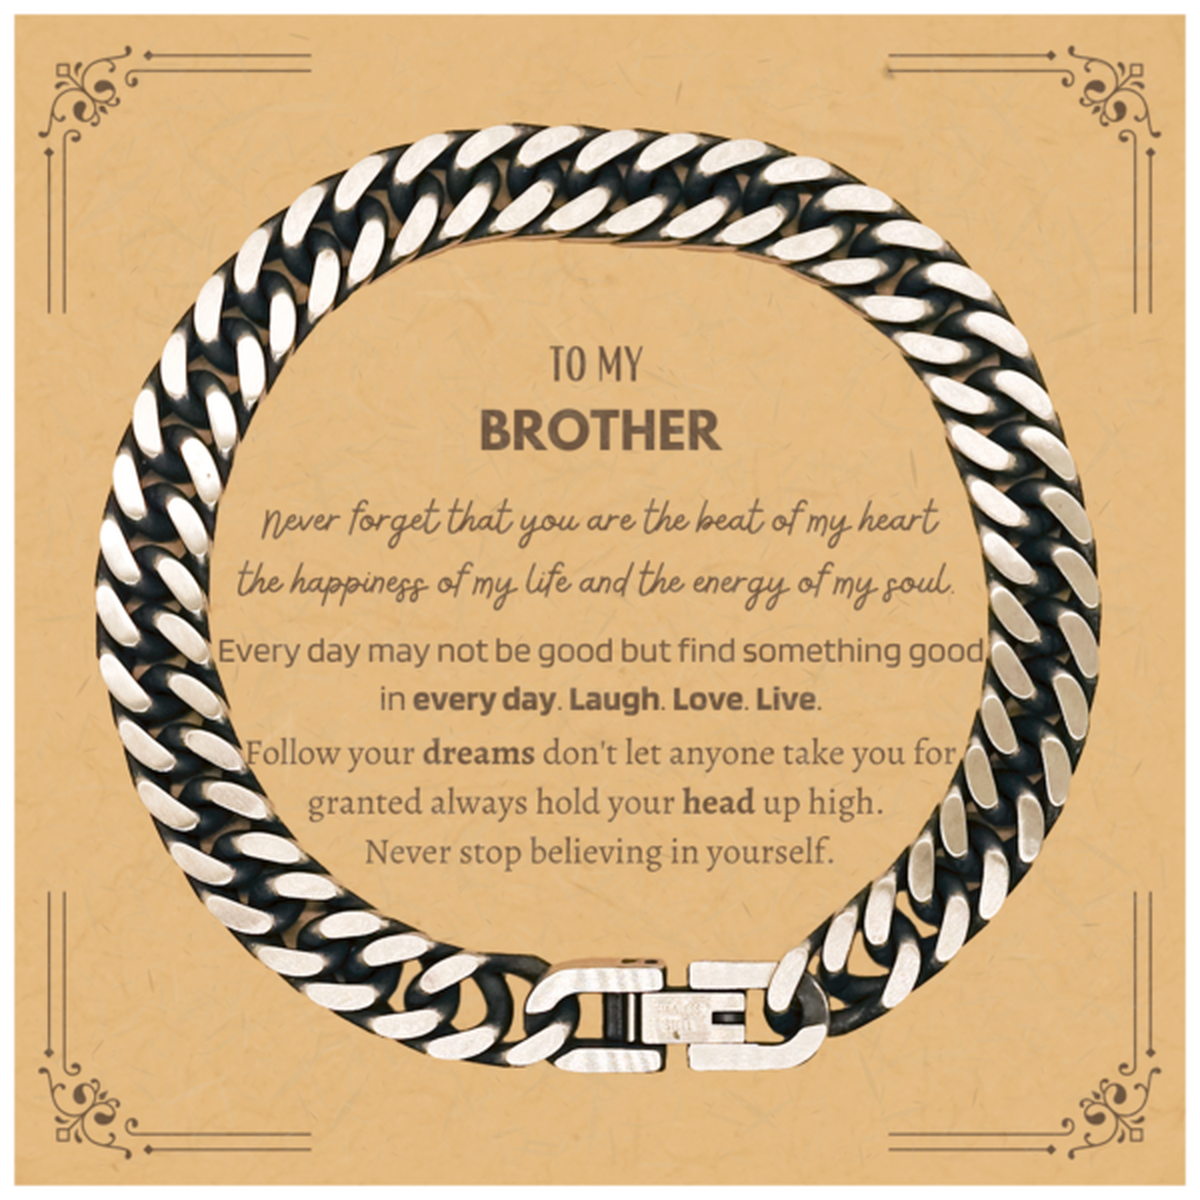 To My Brother Message Card Gifts, Christmas Brother Cuban Link Chain Bracelet Present, Birthday Unique Motivational For Brother, To My Brother Never forget that you are the beat of my heart the happiness of my life and the energy of my soul